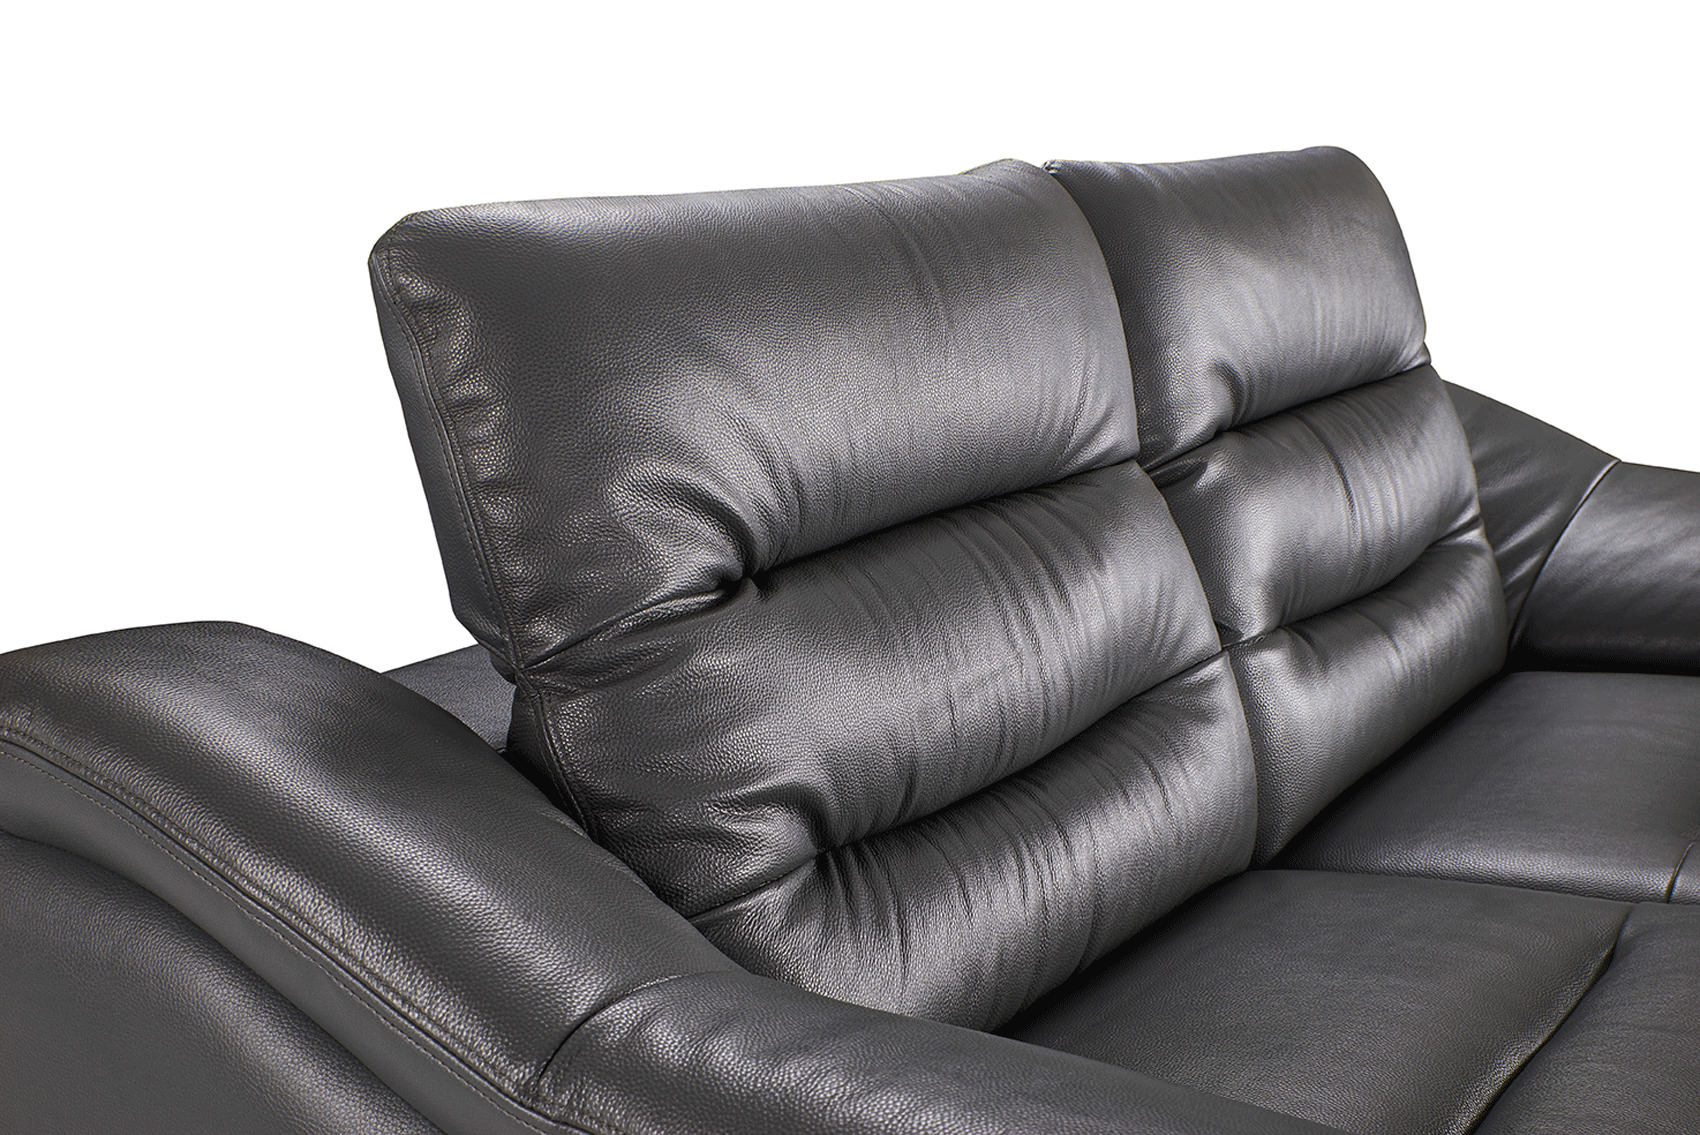 Contemporary Leather Grey Living Room Set